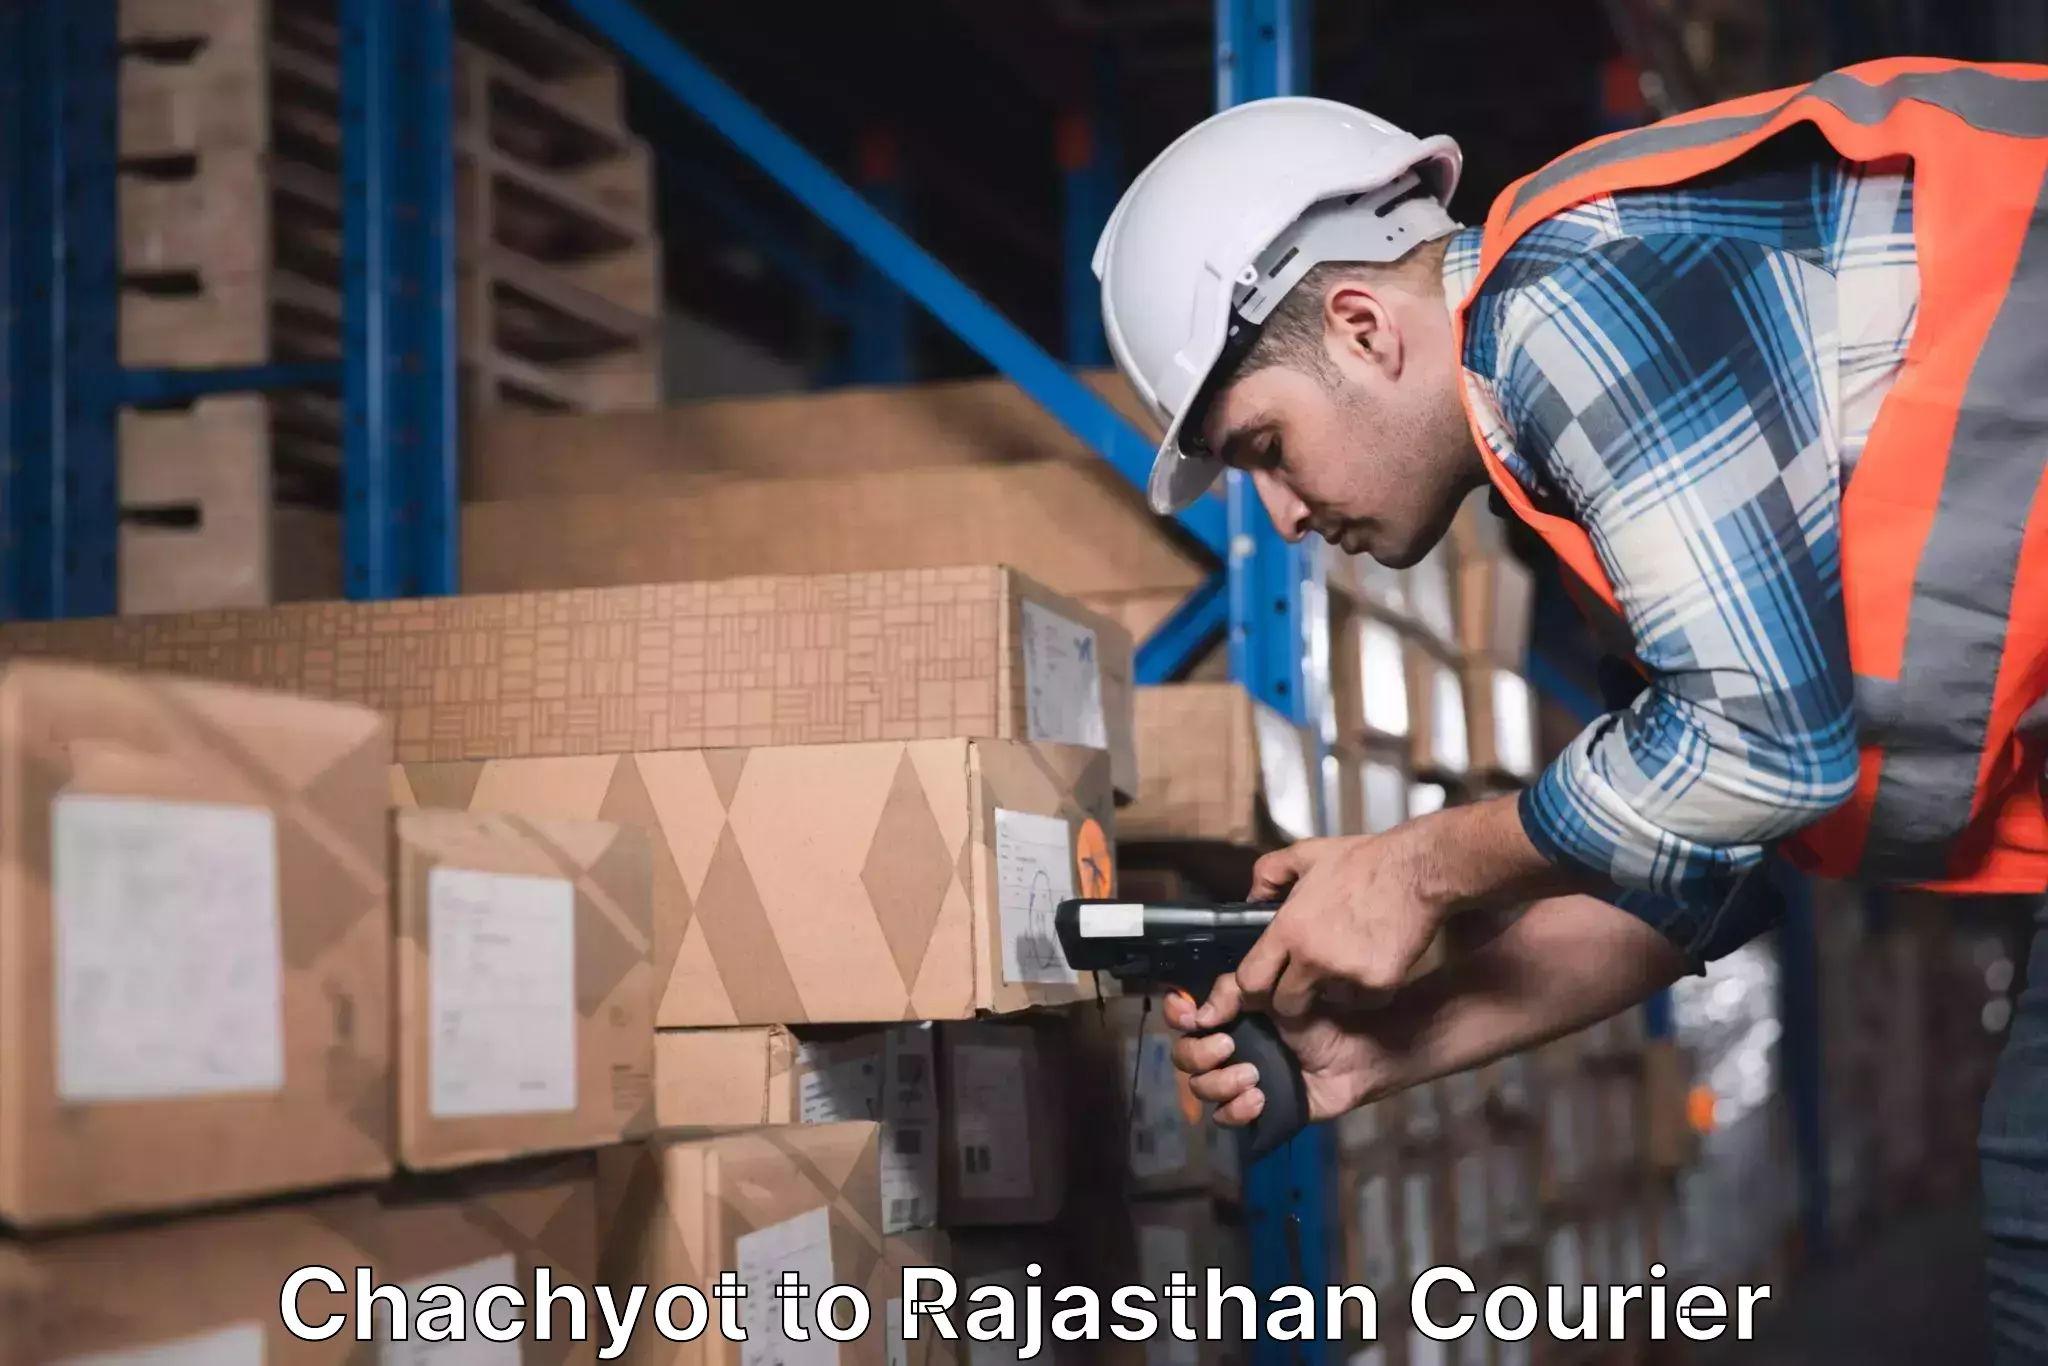 Courier service innovation Chachyot to Pratapgarh Rajasthan